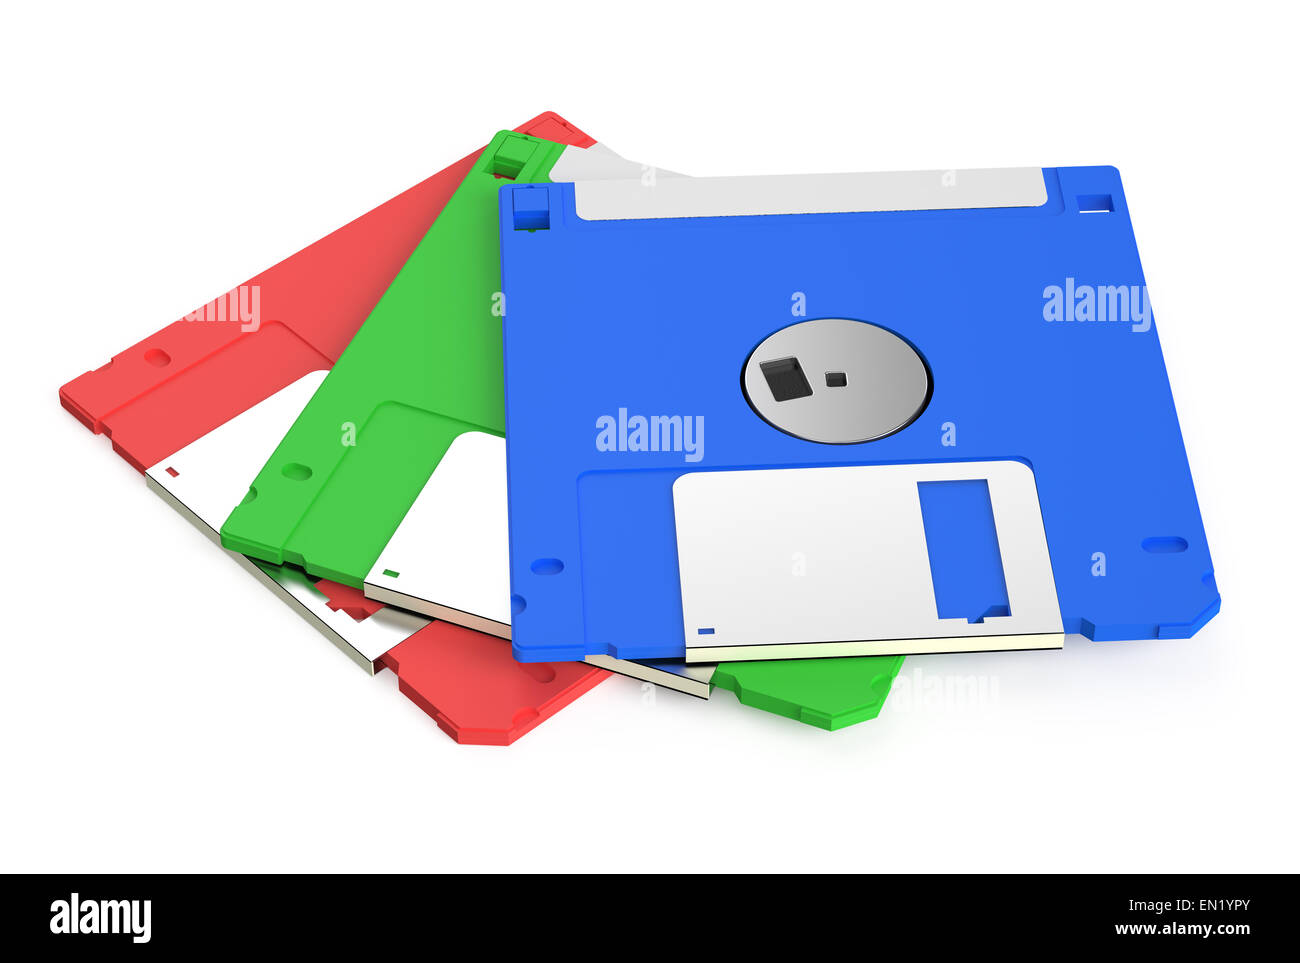 colored floppy disks isolated on white background Stock Photo